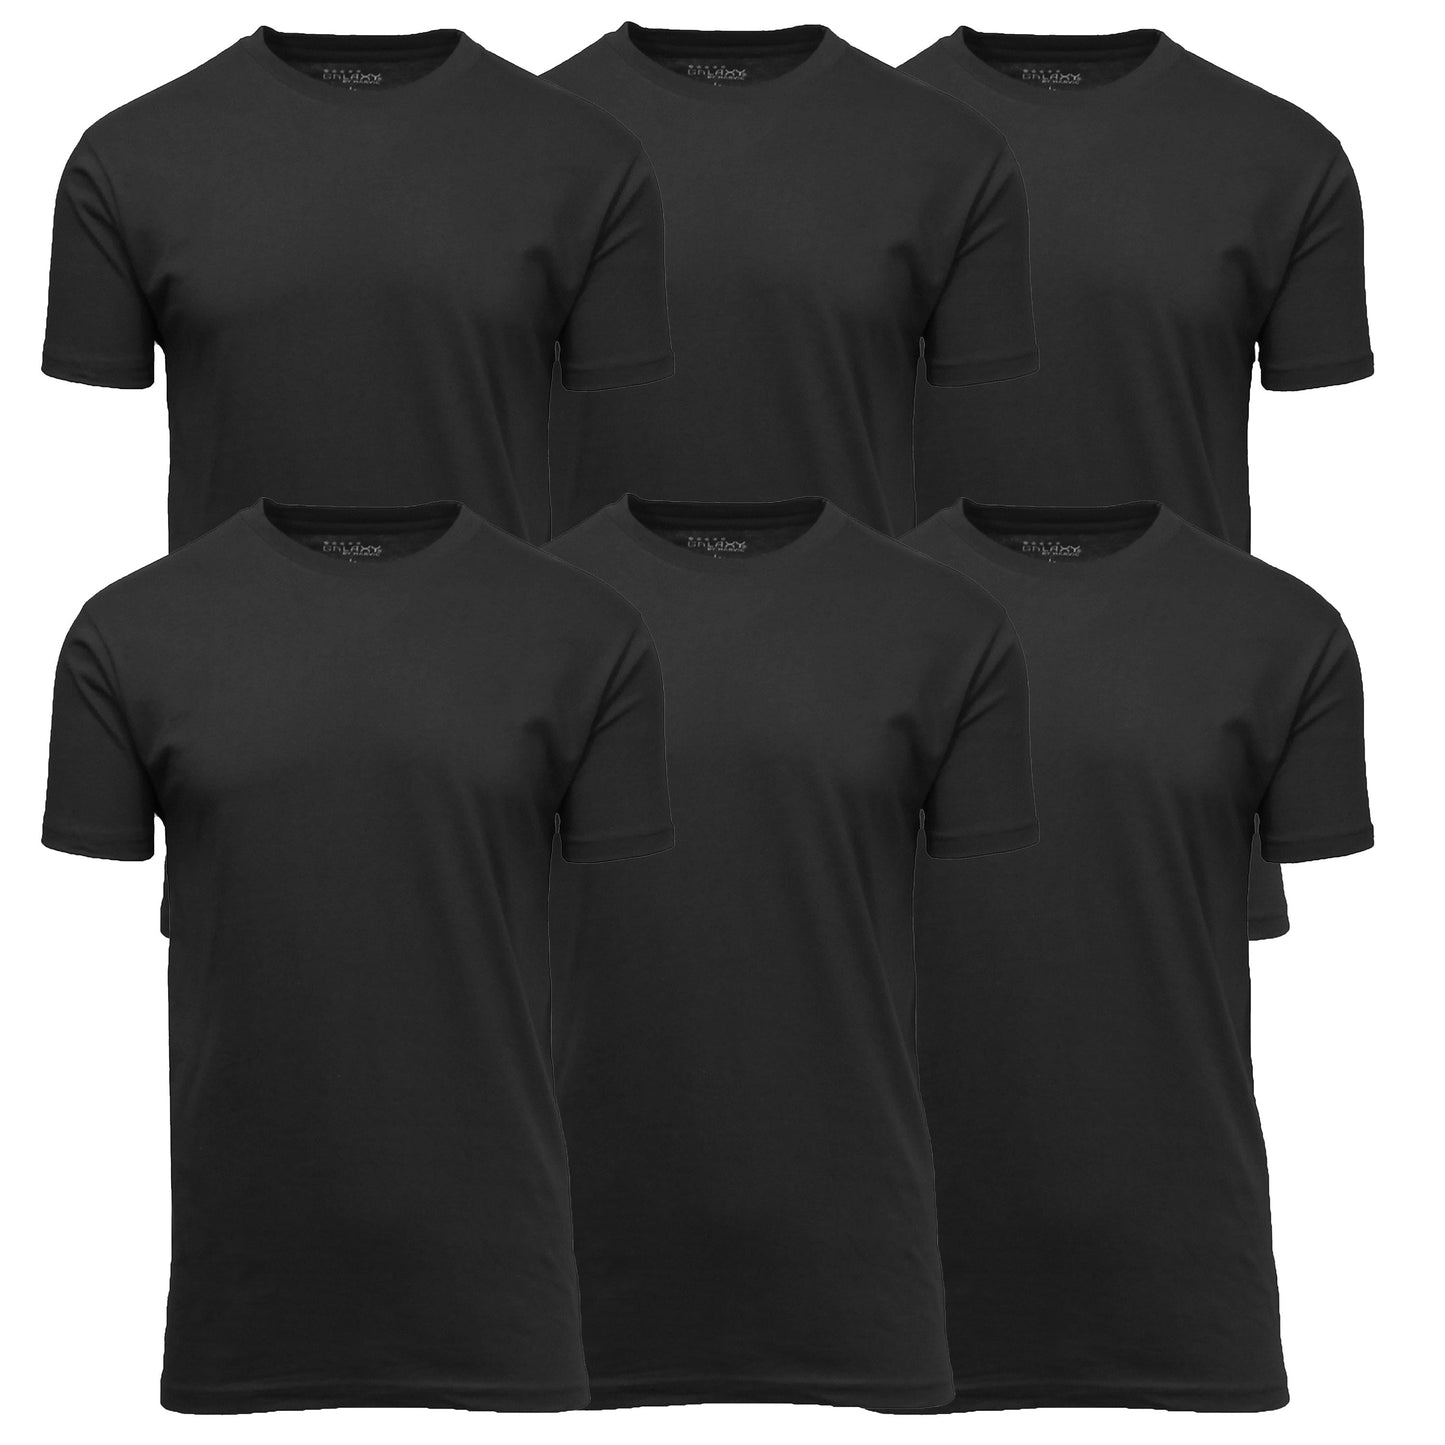 (6-Pack) Short Sleeve Crew-Neck Modern Fit Classic Tees (S-3XL) - GalaxybyHarvic